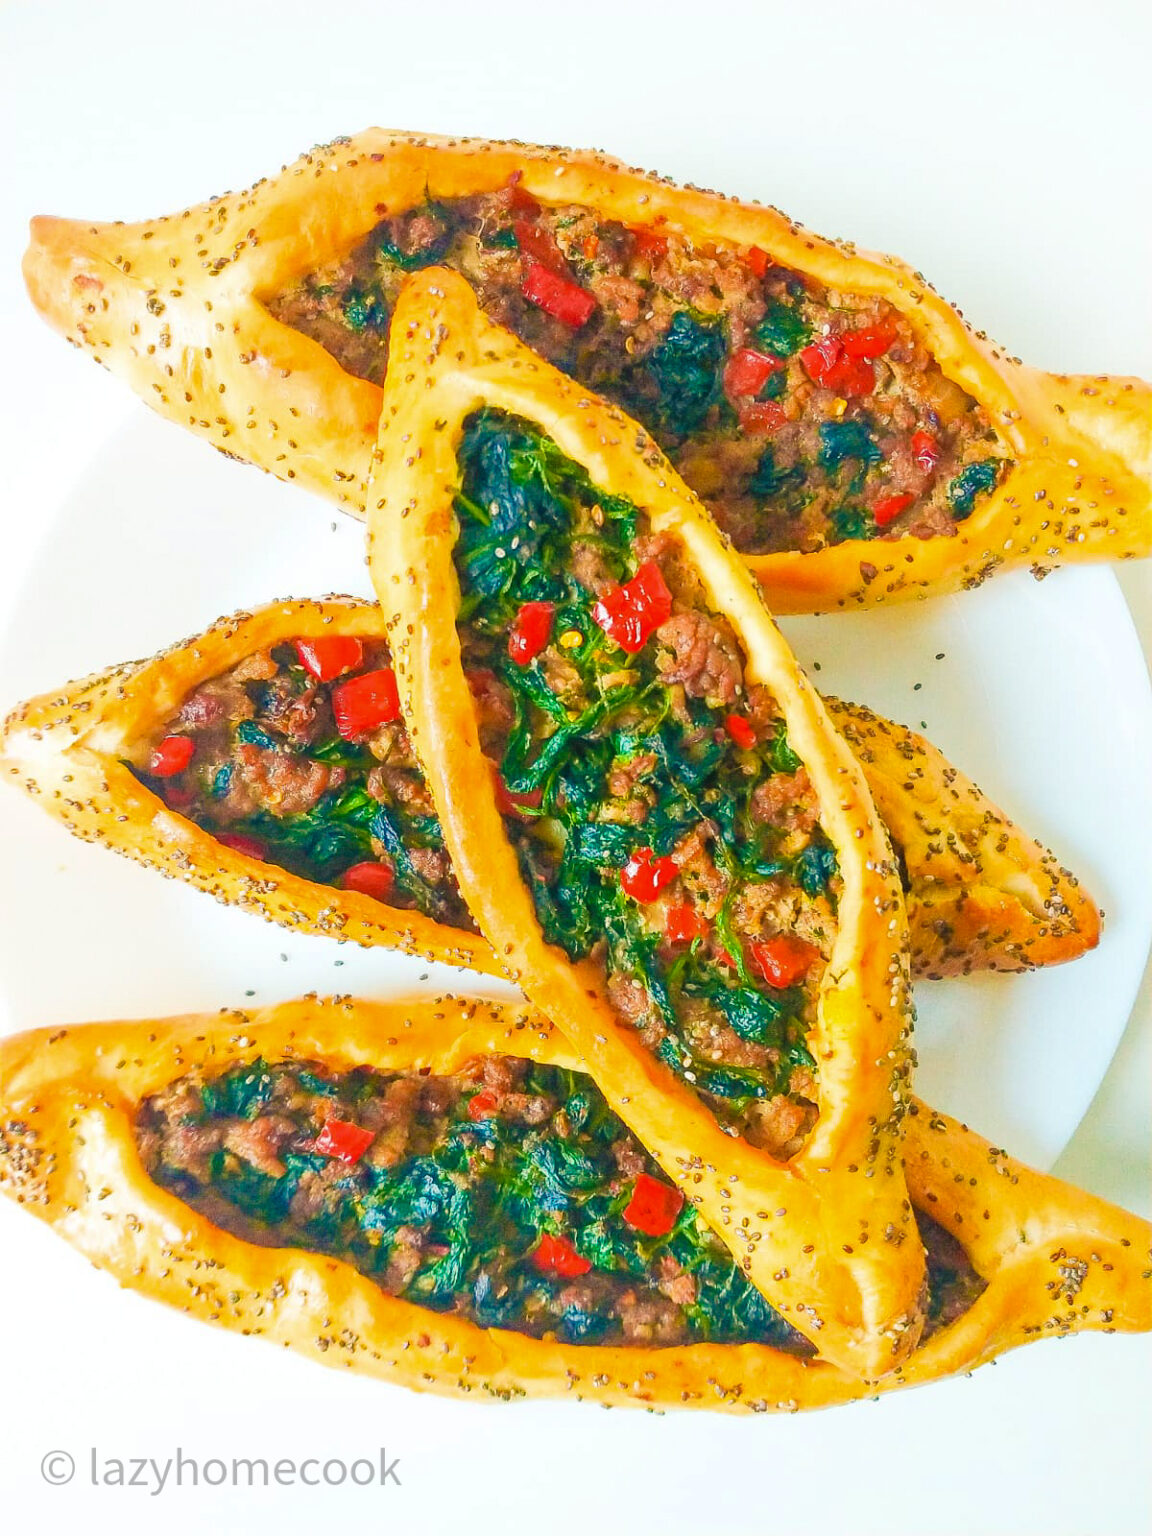 Turkish Pide With Spinach And Minced Beef - Lazyhomecook